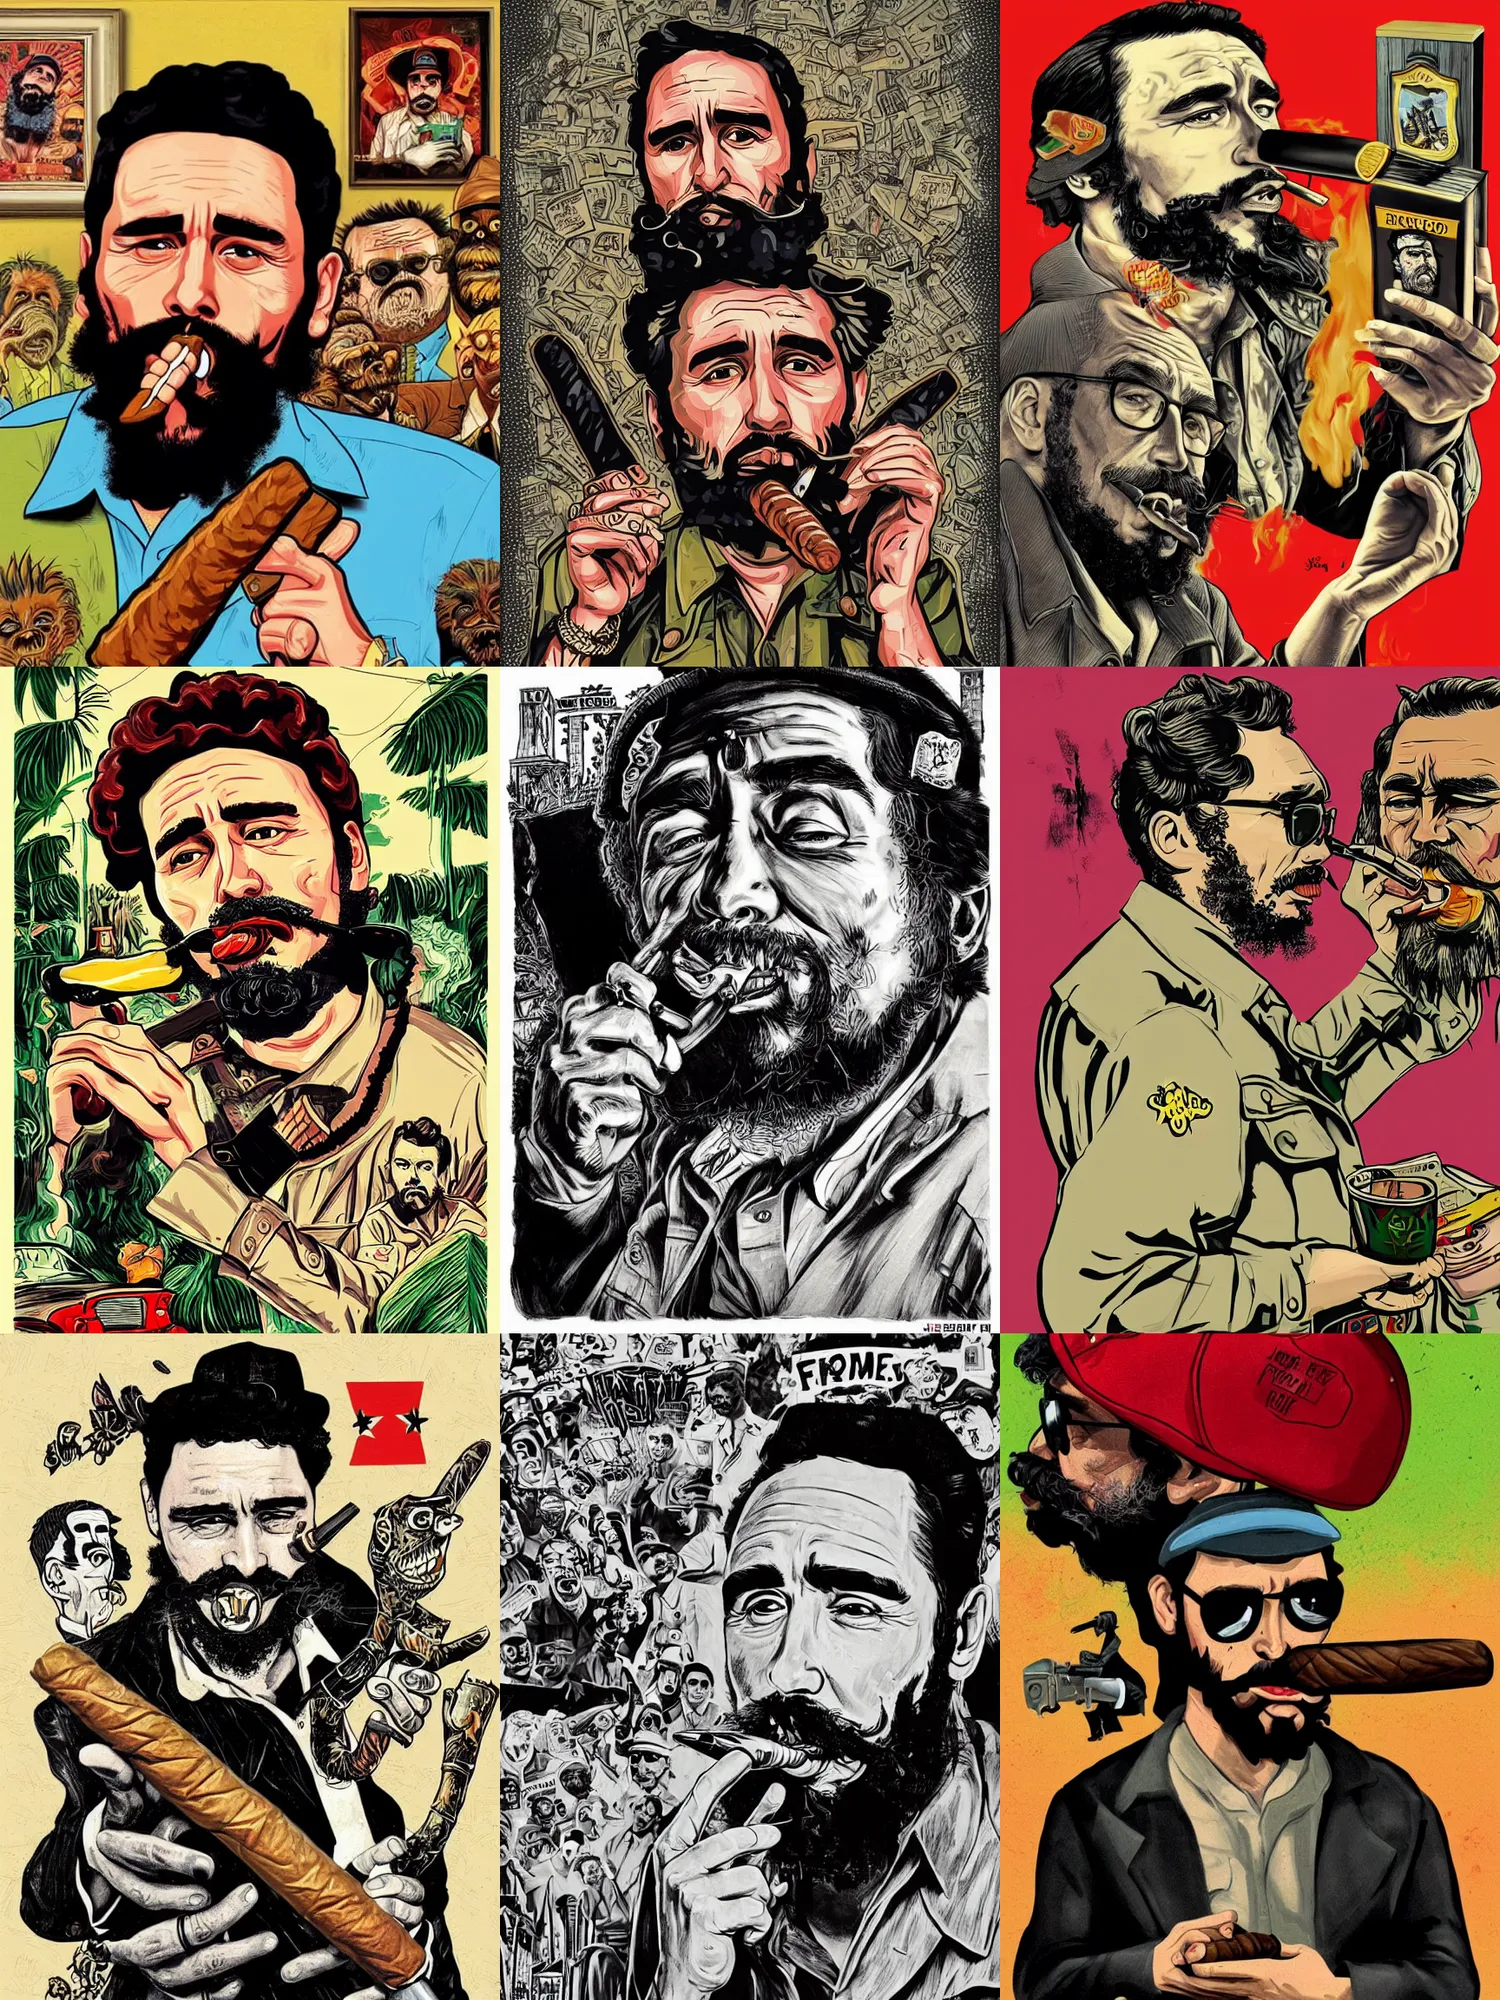 Prompt: James Franco as Fidel Castro smoking a large cigar, lowbrow, pop surrealism art style, contemporary art illustration, intricate 8K detail, in the style of Big Daddy Roth artwork, Grand Theft Auto character design aesthetic